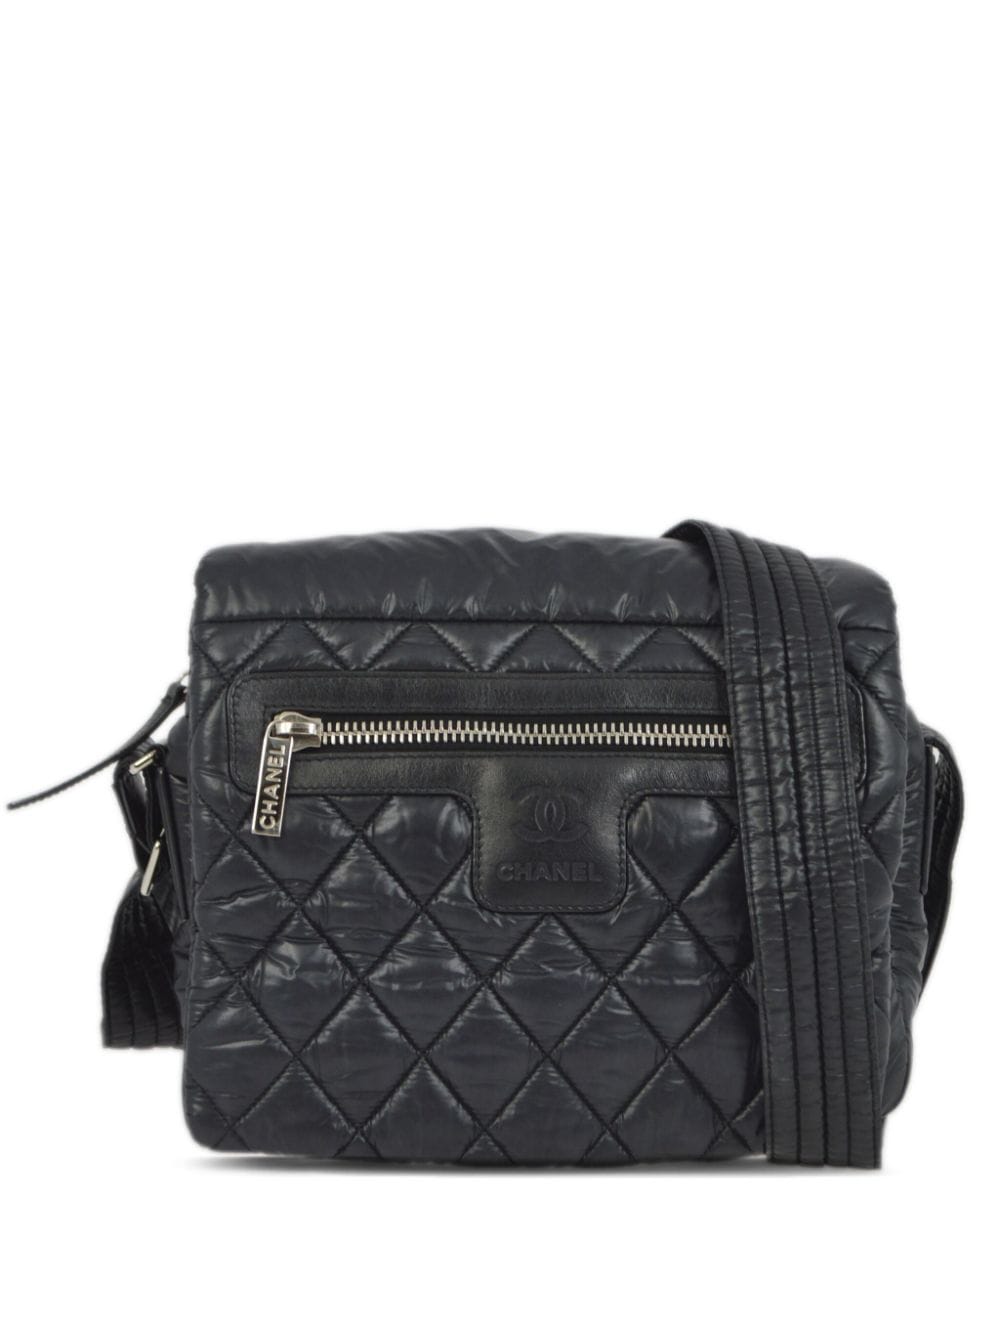 Pre-owned Chanel 2013 Coco Cocoon Shoulder Bag In Black